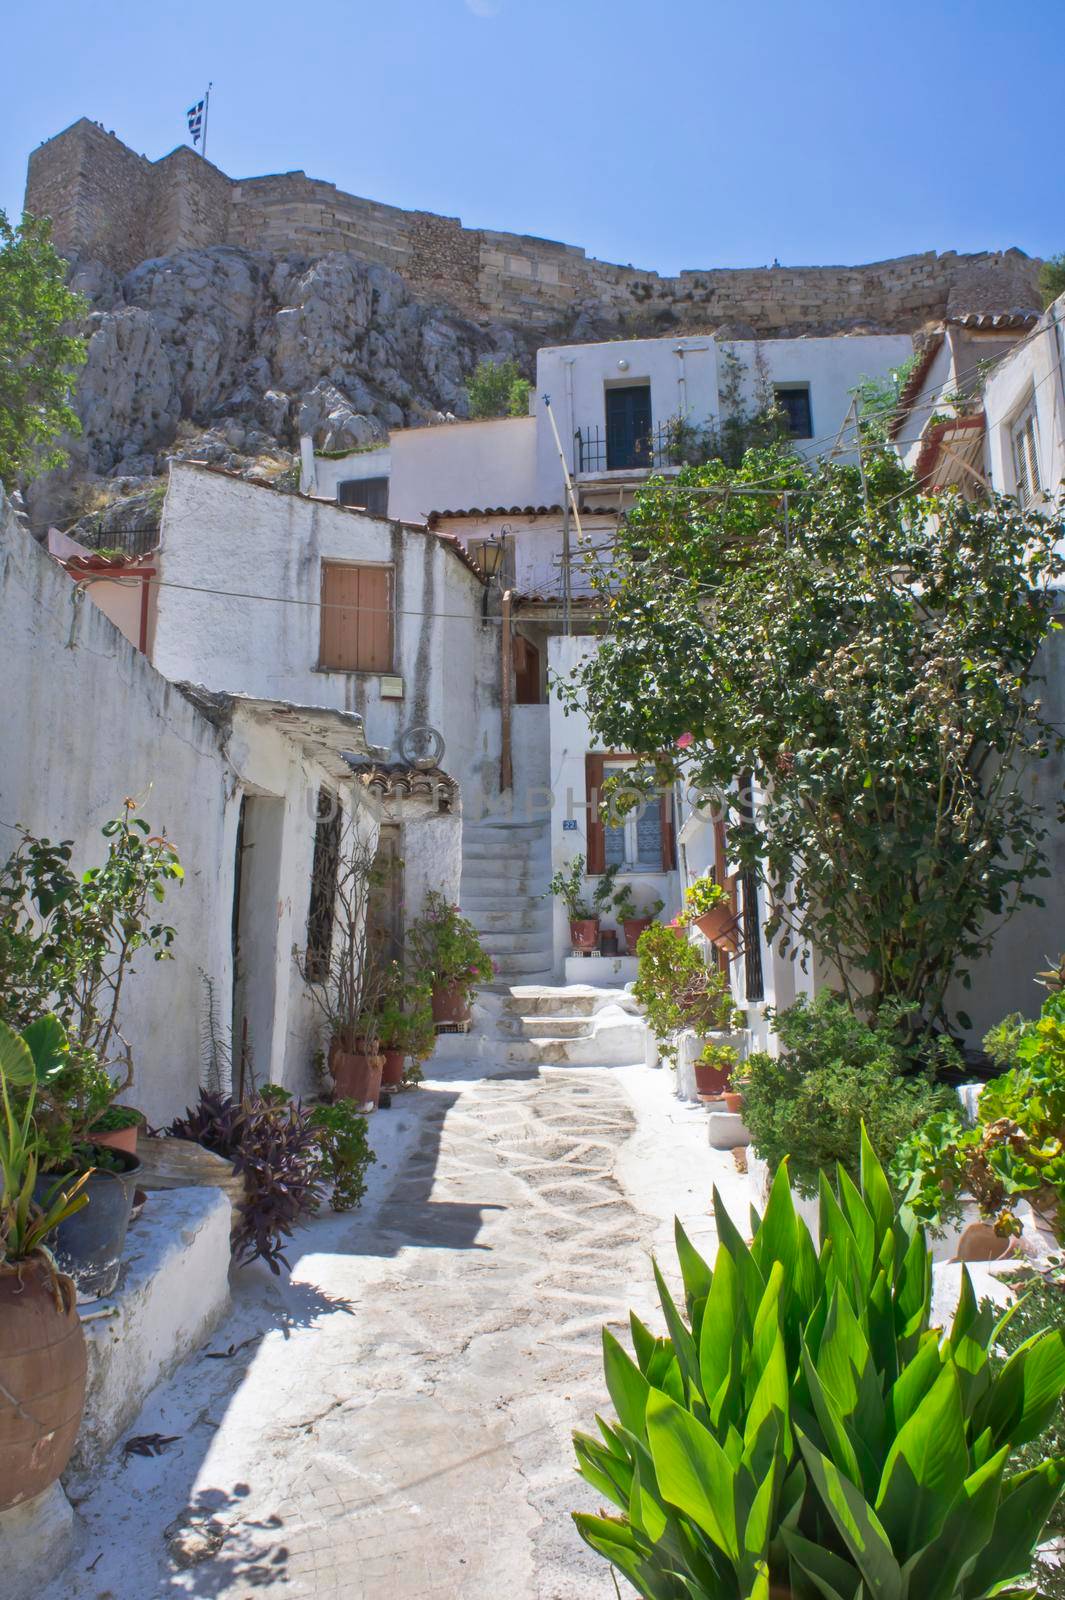 Athens Plaka Anafiotika, Old city street view with small traditional houses, Greece, Europe